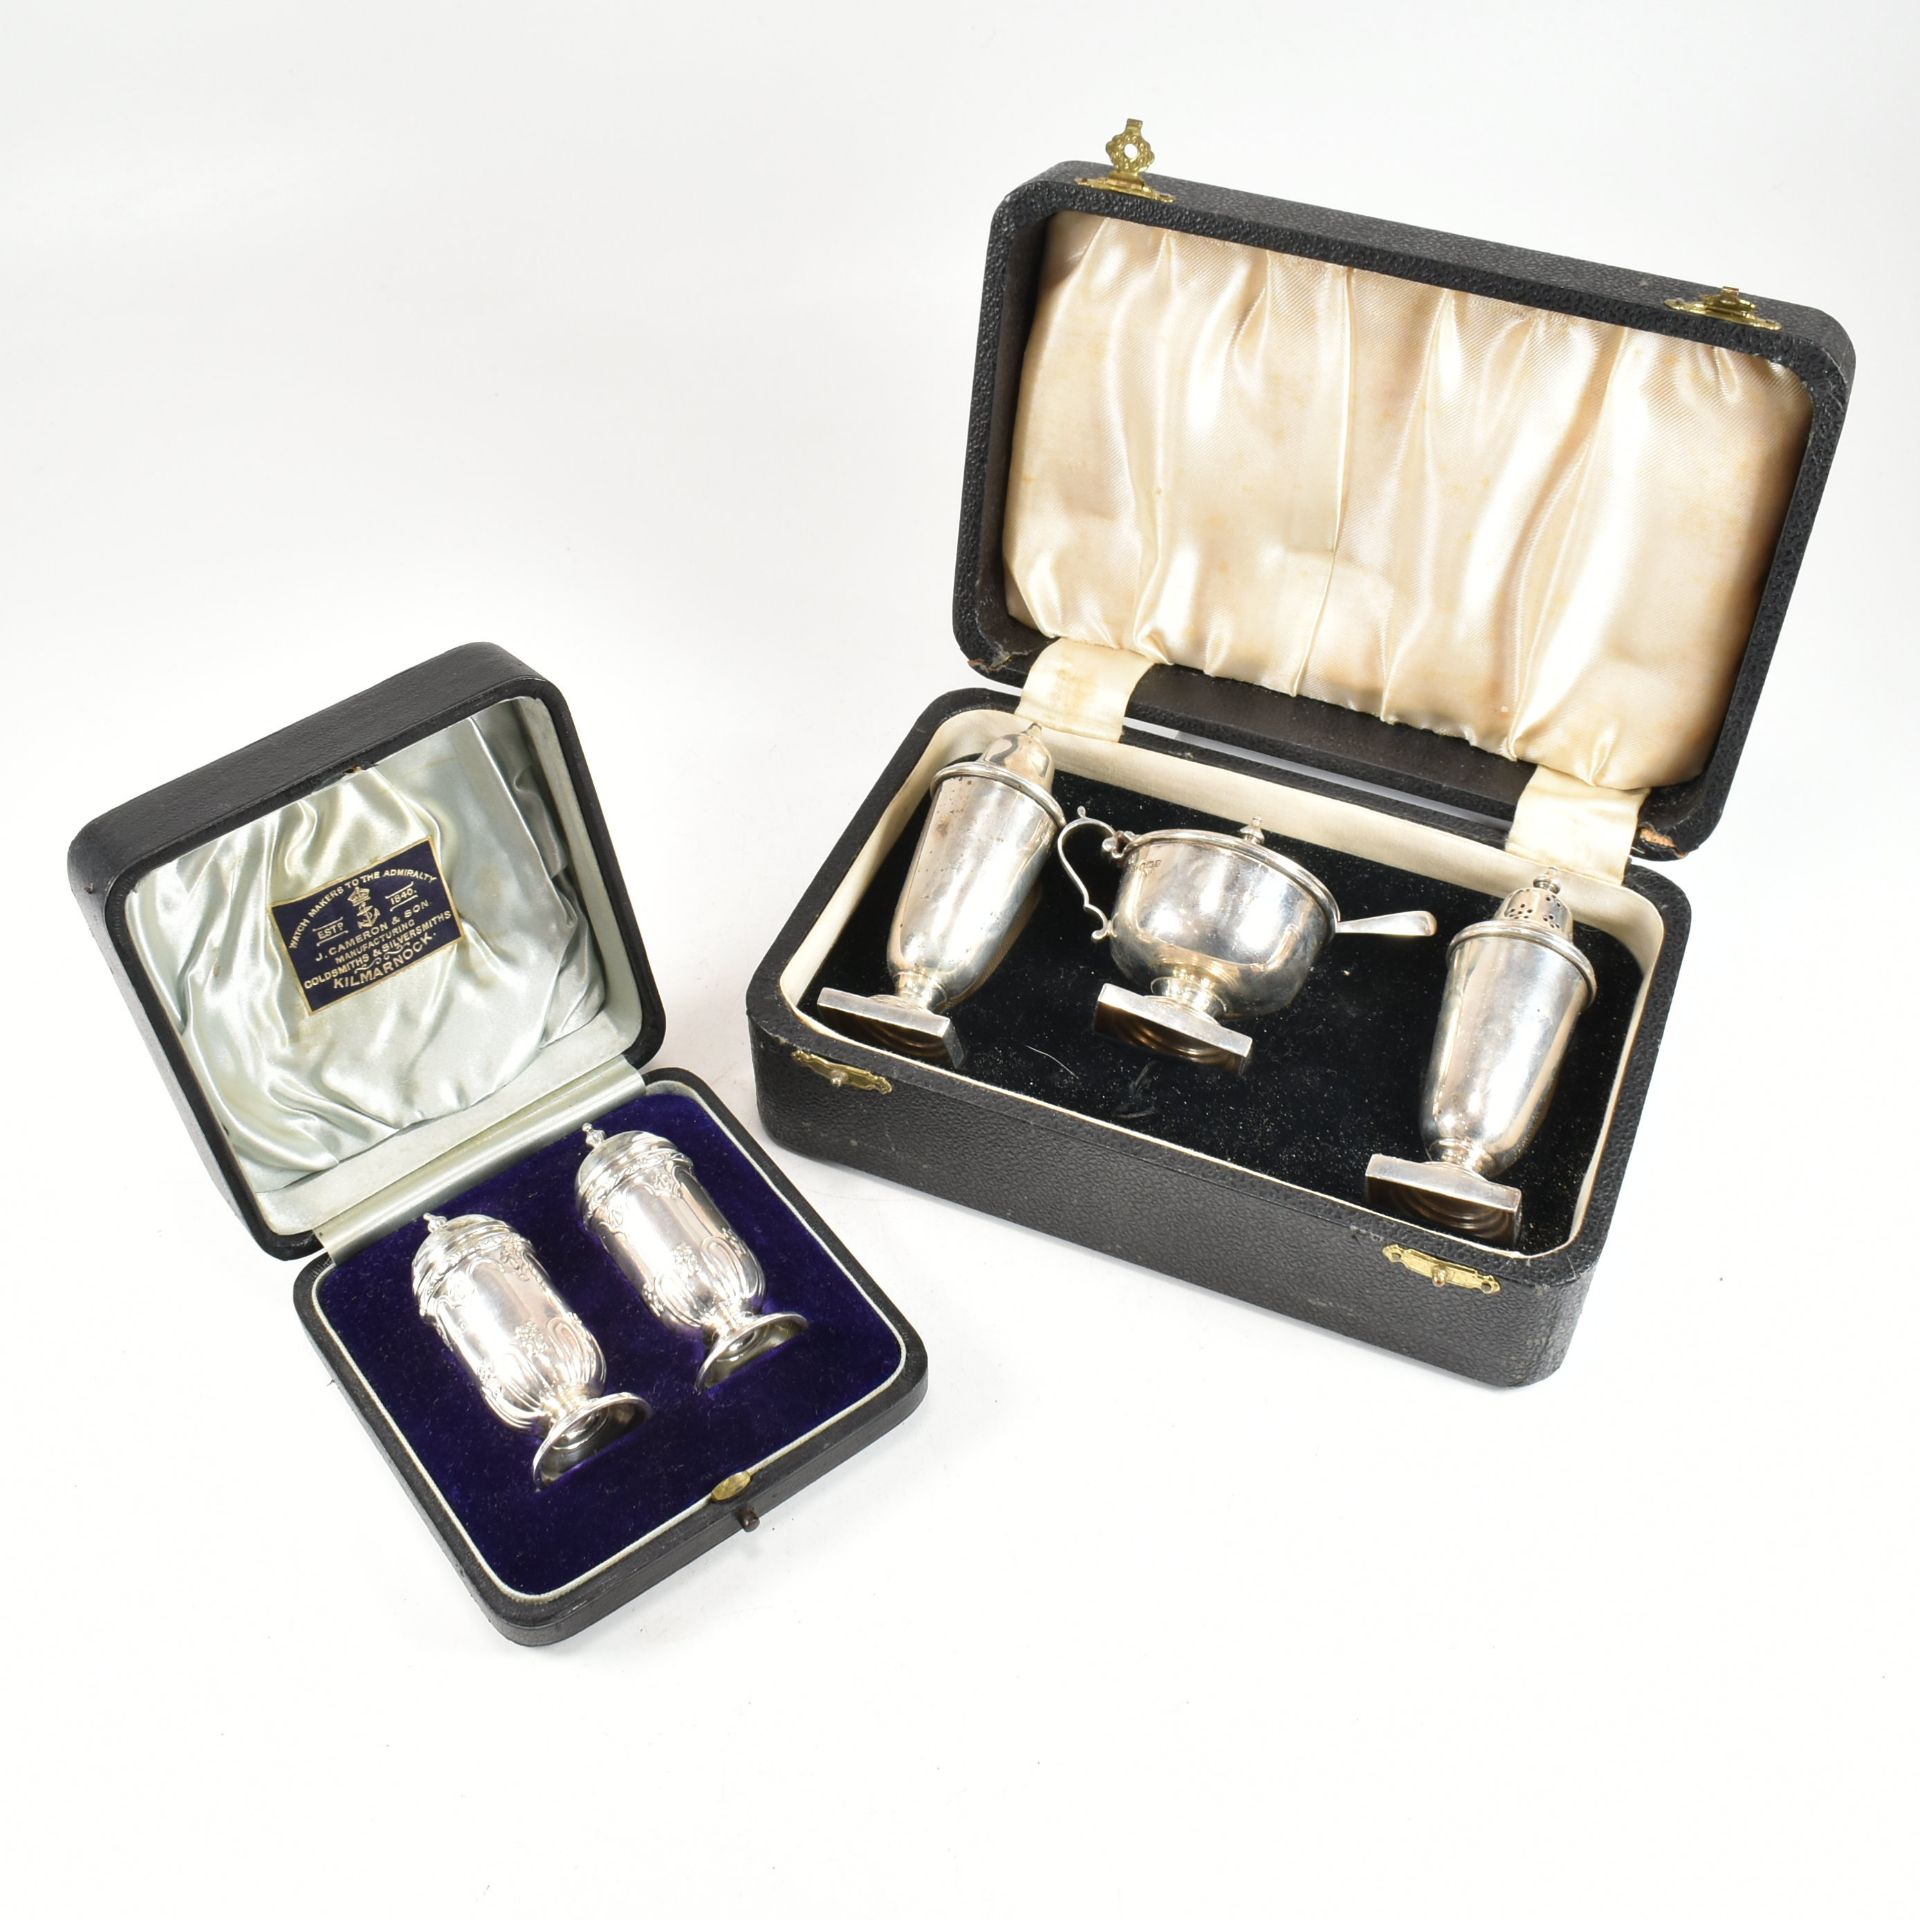 TWO EARLY 20TH CENTURY CASED HALLMARKED SILVER CRUET SETS